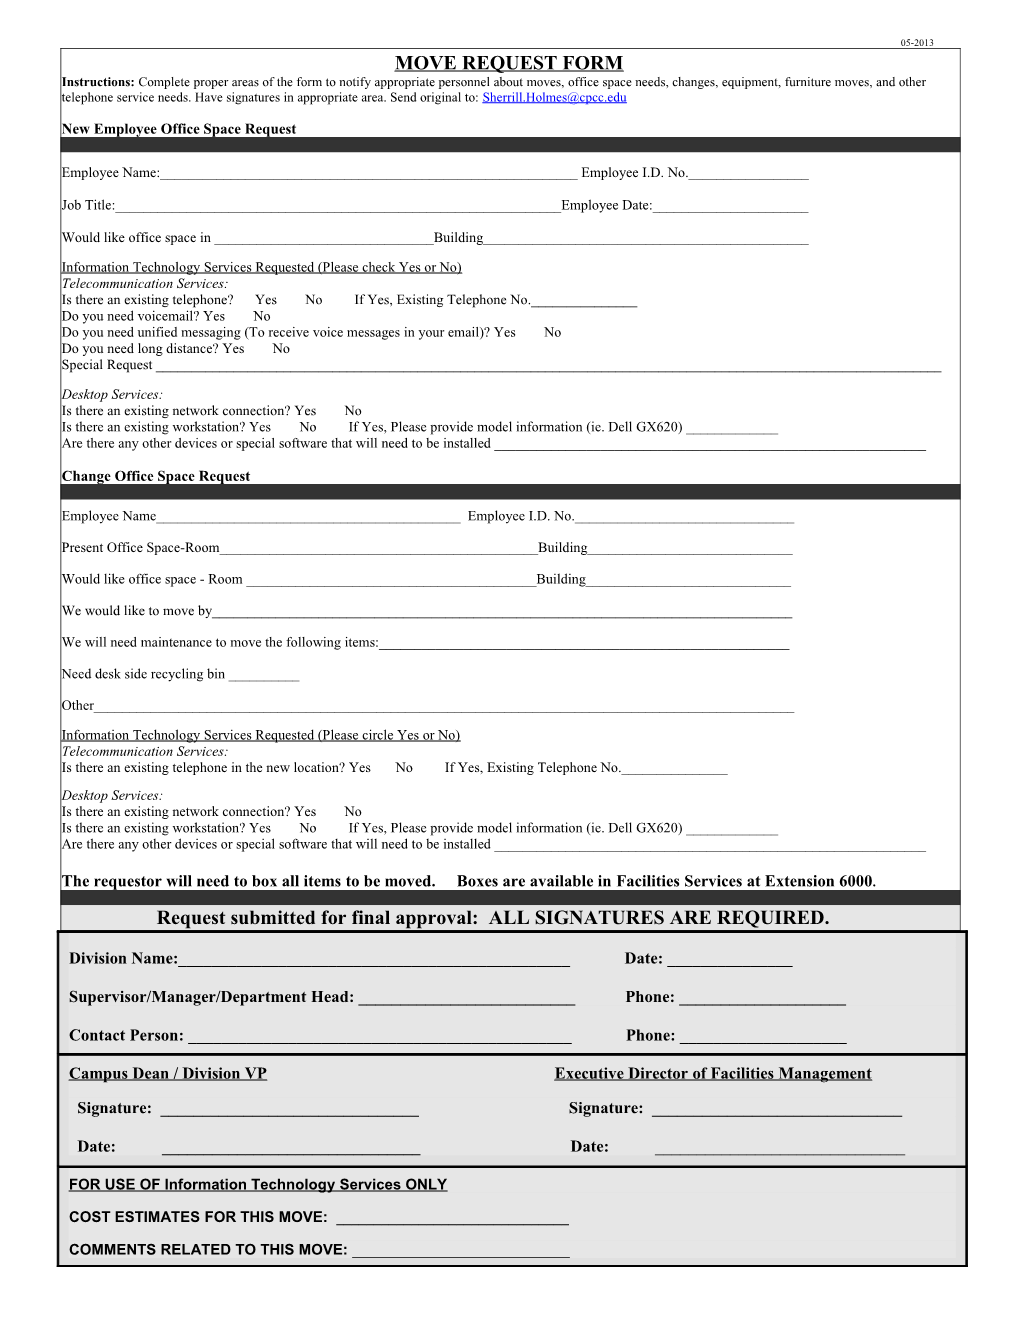 Move/Office Space Assignment Request Form